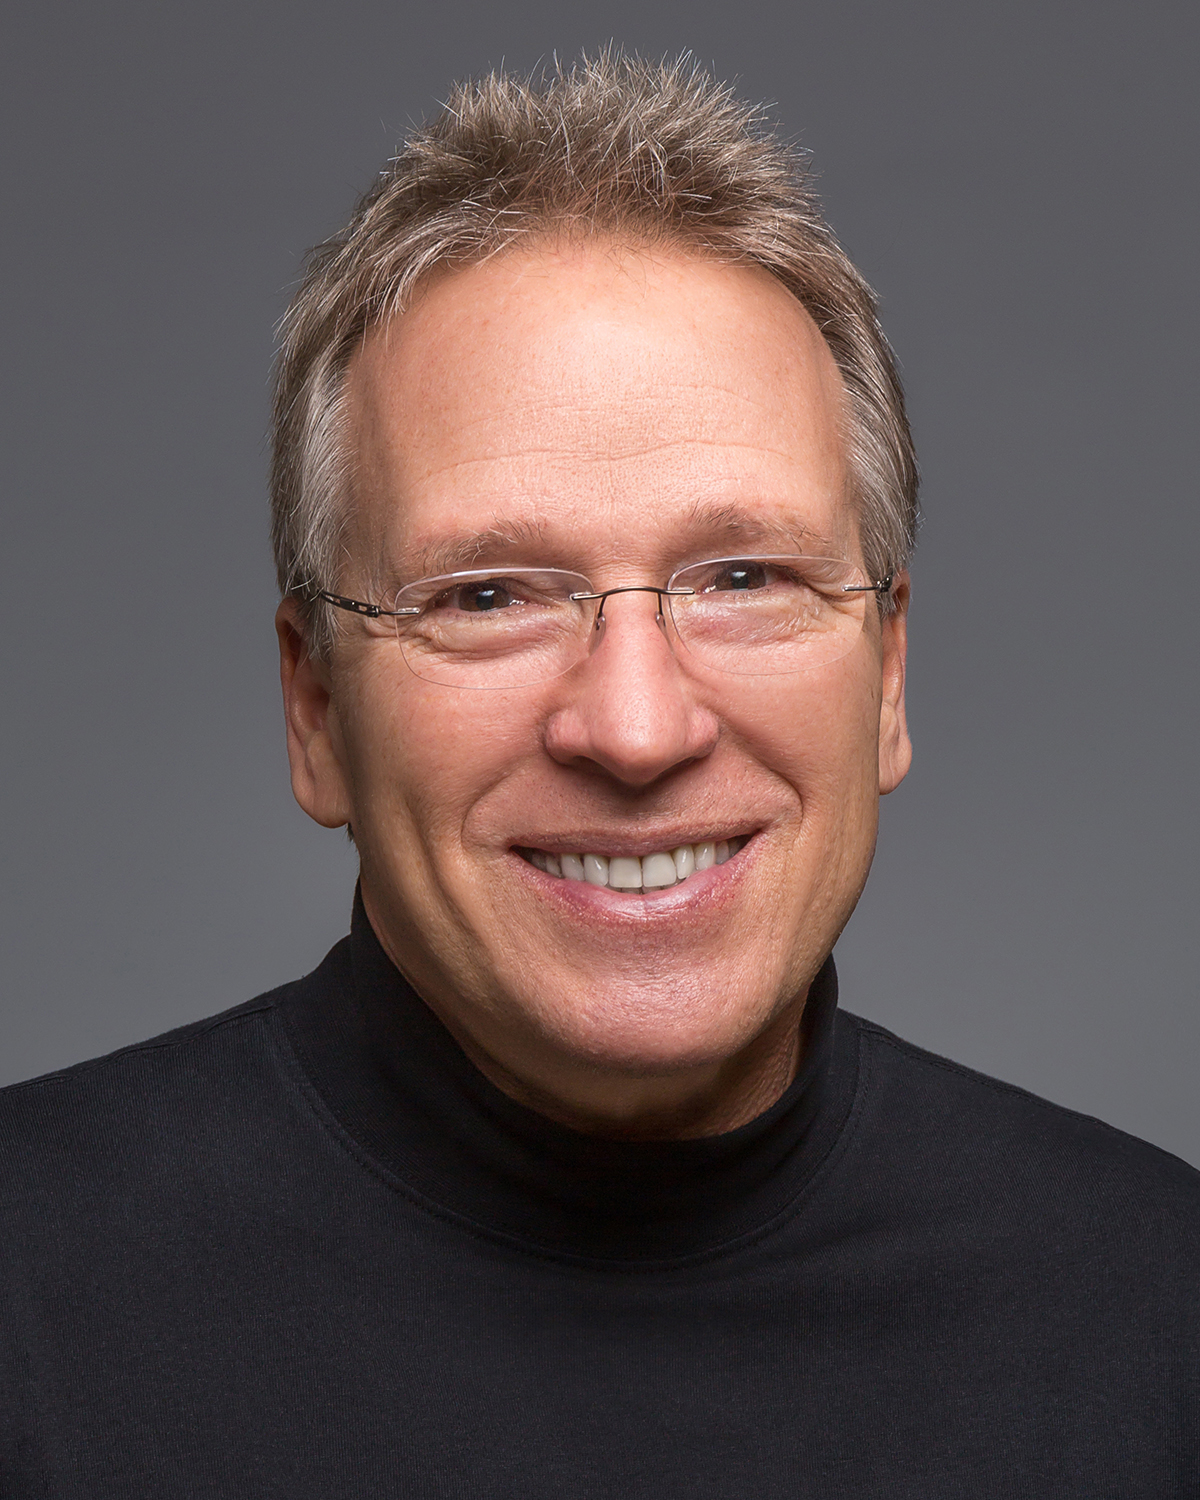 Professional headshot of Dave Nelsen, smiling with a friendly demeanor. He's wearing a black turtleneck and rimless glasses, with short, sandy blond, graying hair. The background is a neutral gray, highlighting his approachable expression.